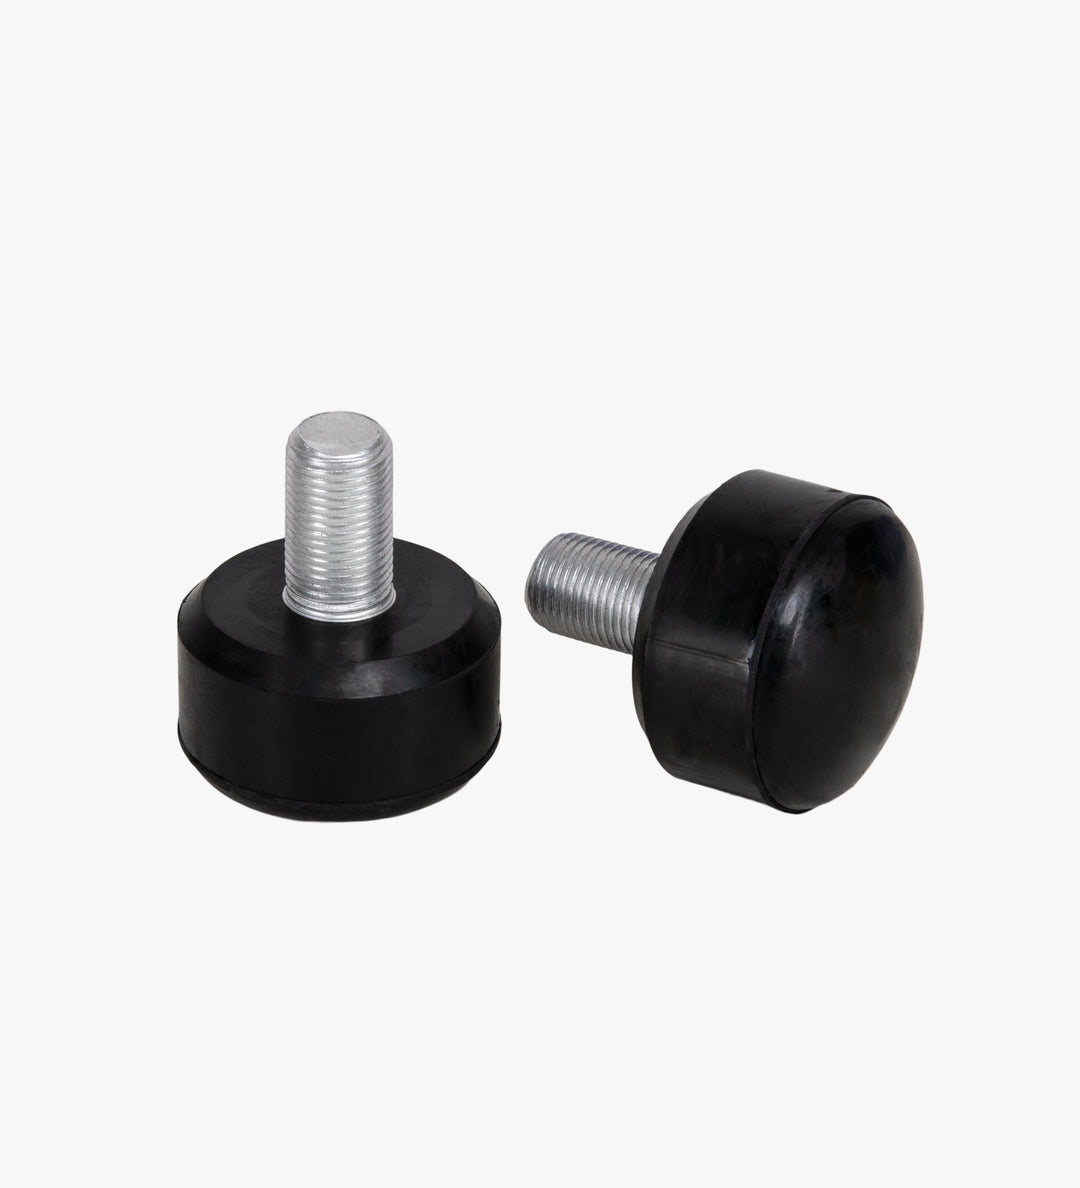 Black Adjustable C7 Roller Skate Stoppers as seen on Femme Fatale, made from durable rubber and measure 47 by 35 mm. 